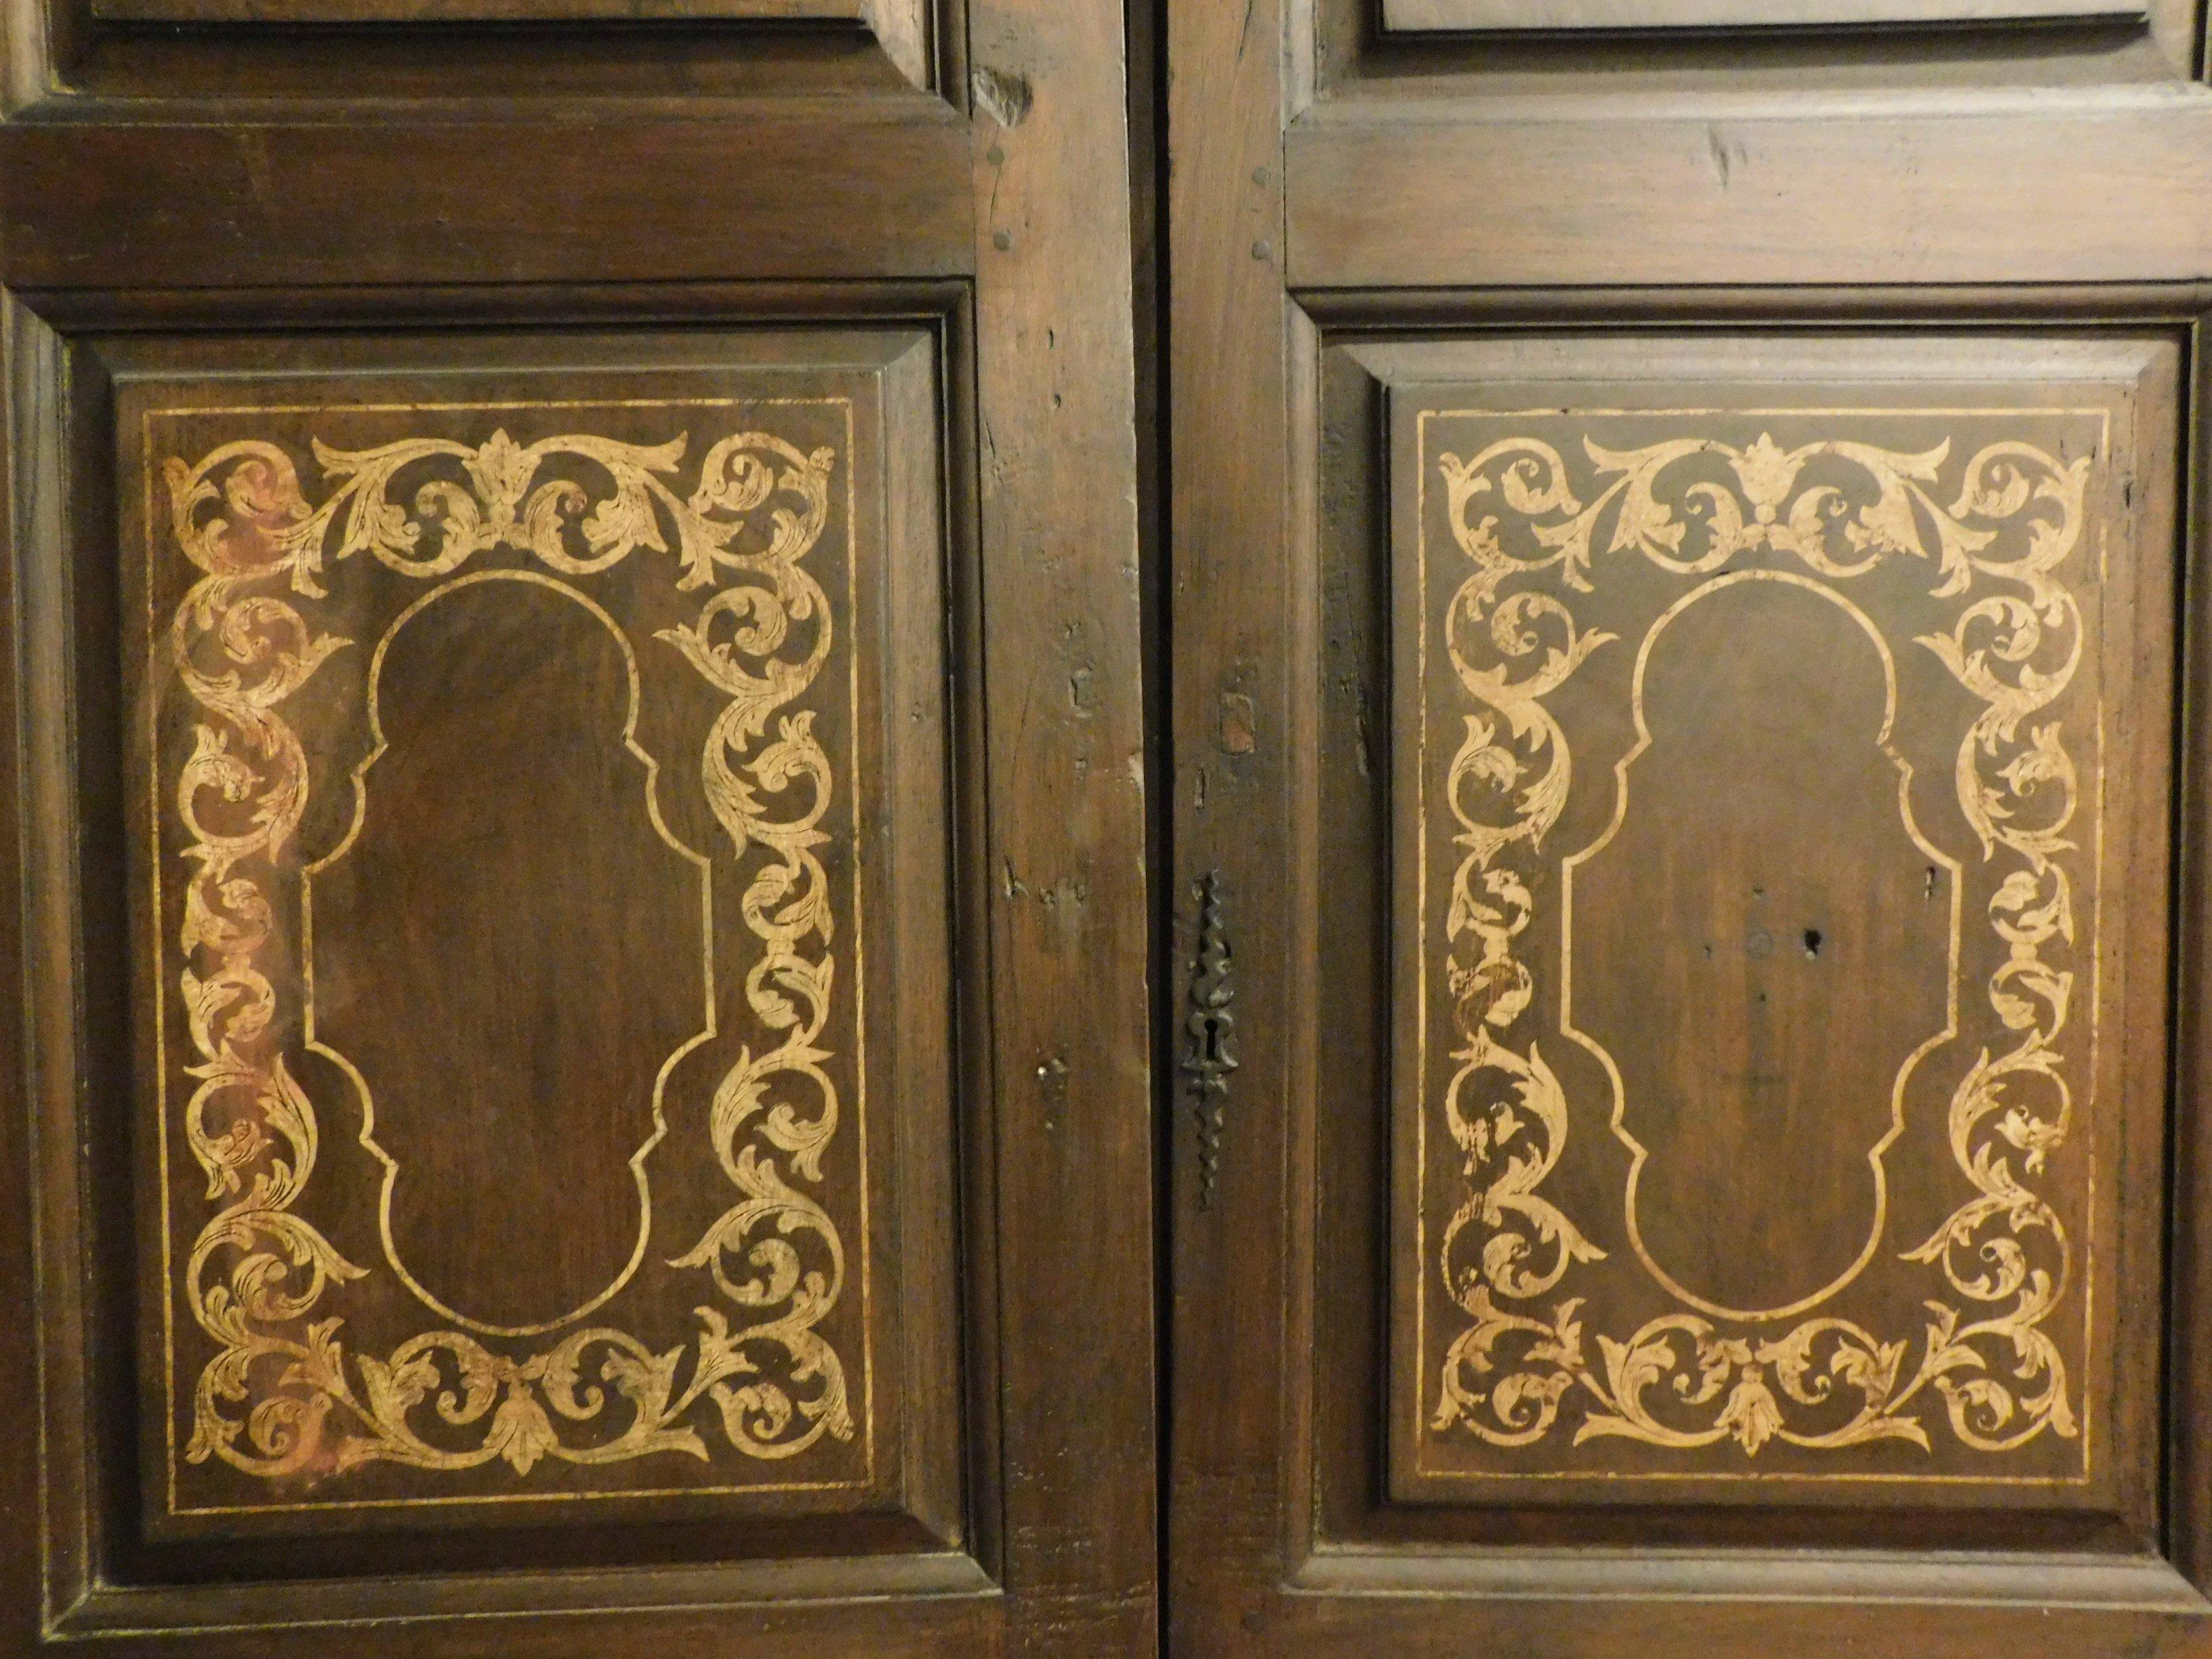 Early 18th Century Antique Walnut Double Door, Two Wings Light/Dark Inlays, 18th Century, Italy For Sale